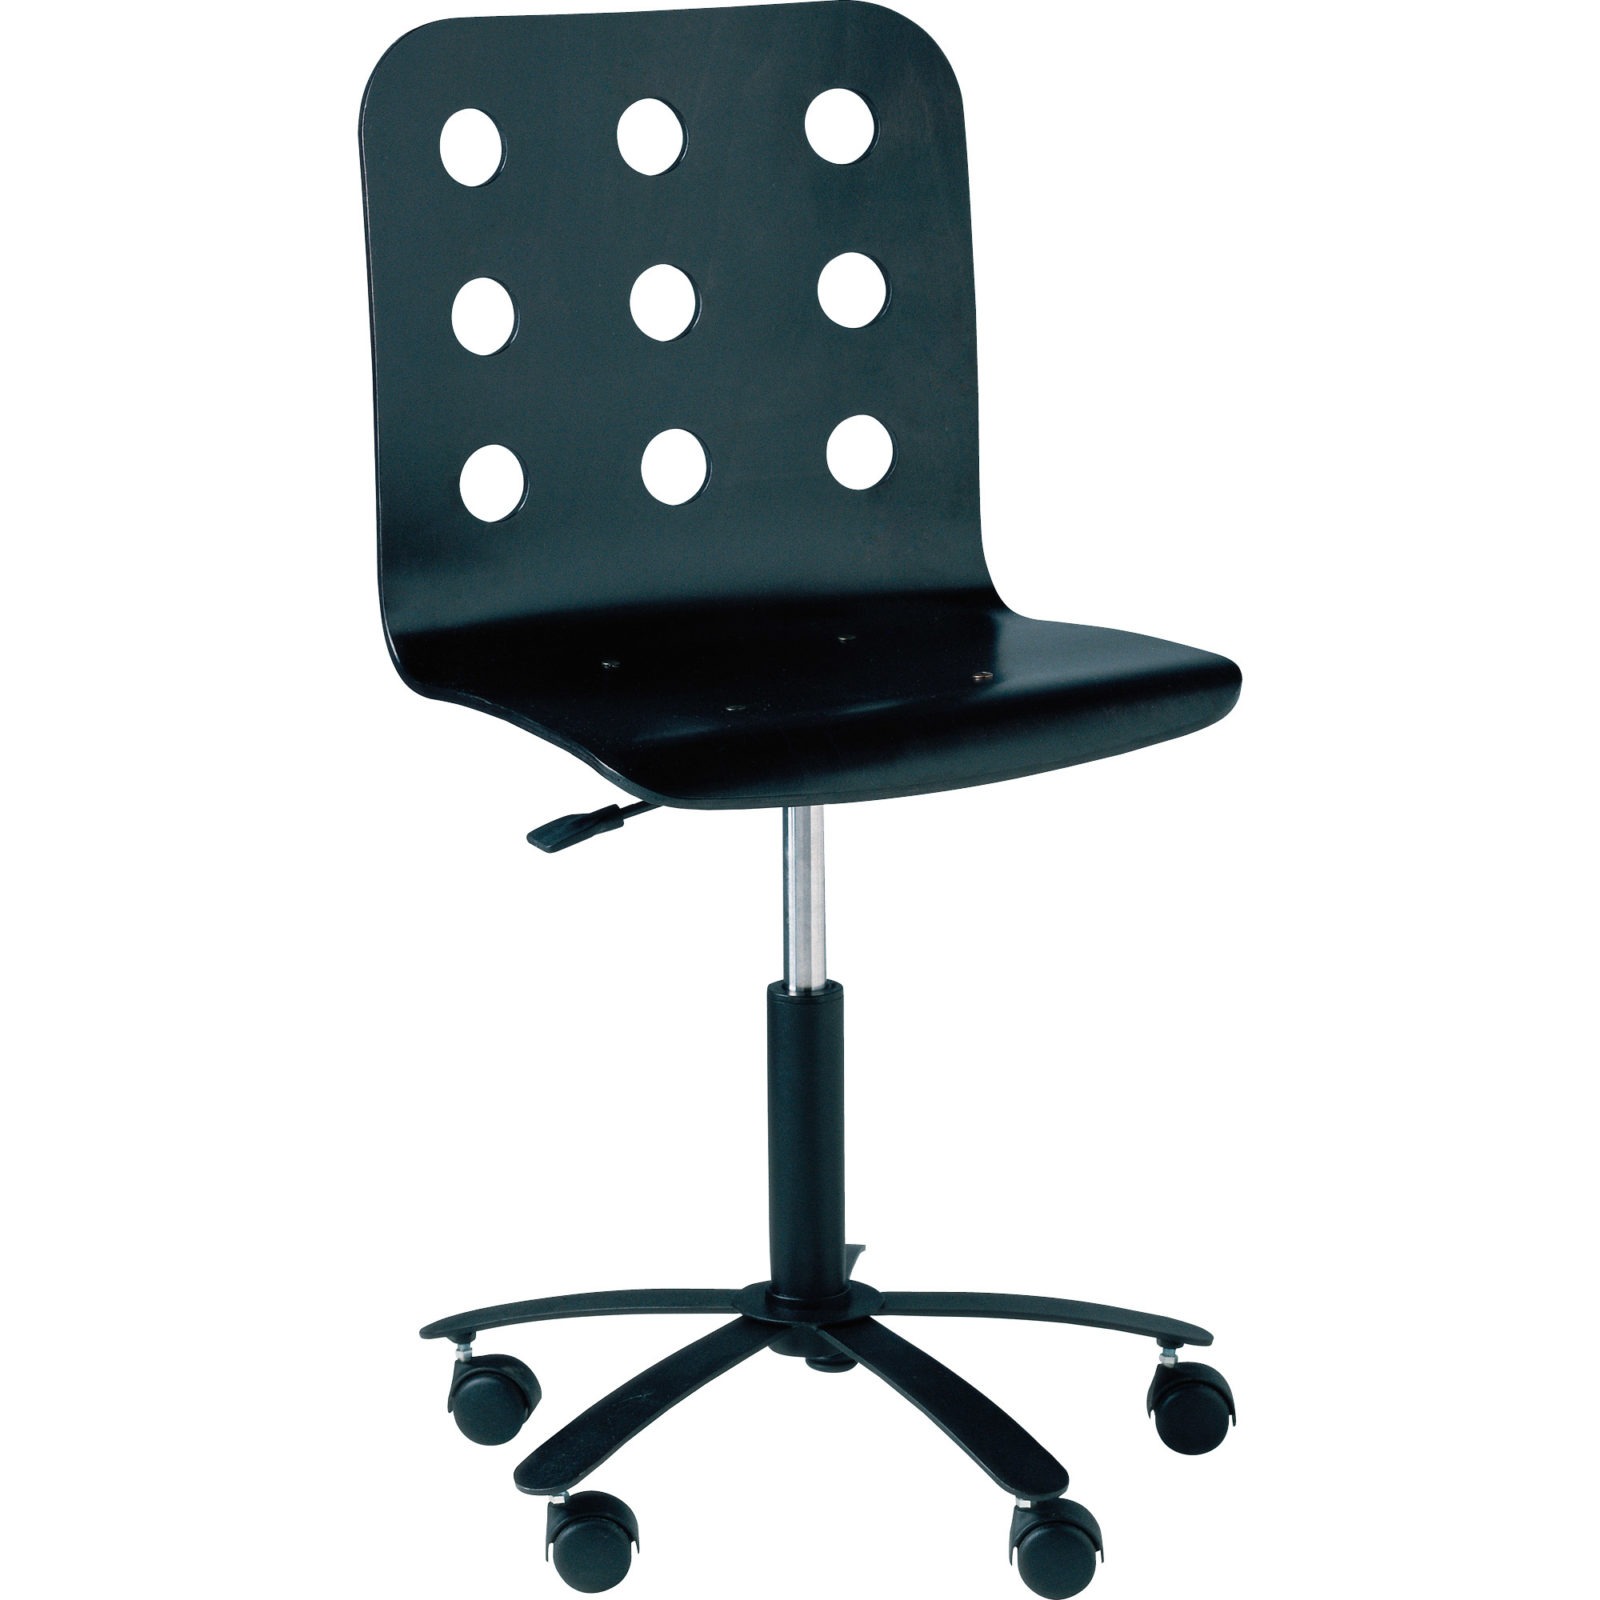 Black swivel desk chair with nine round holes in the backrest, JULES.